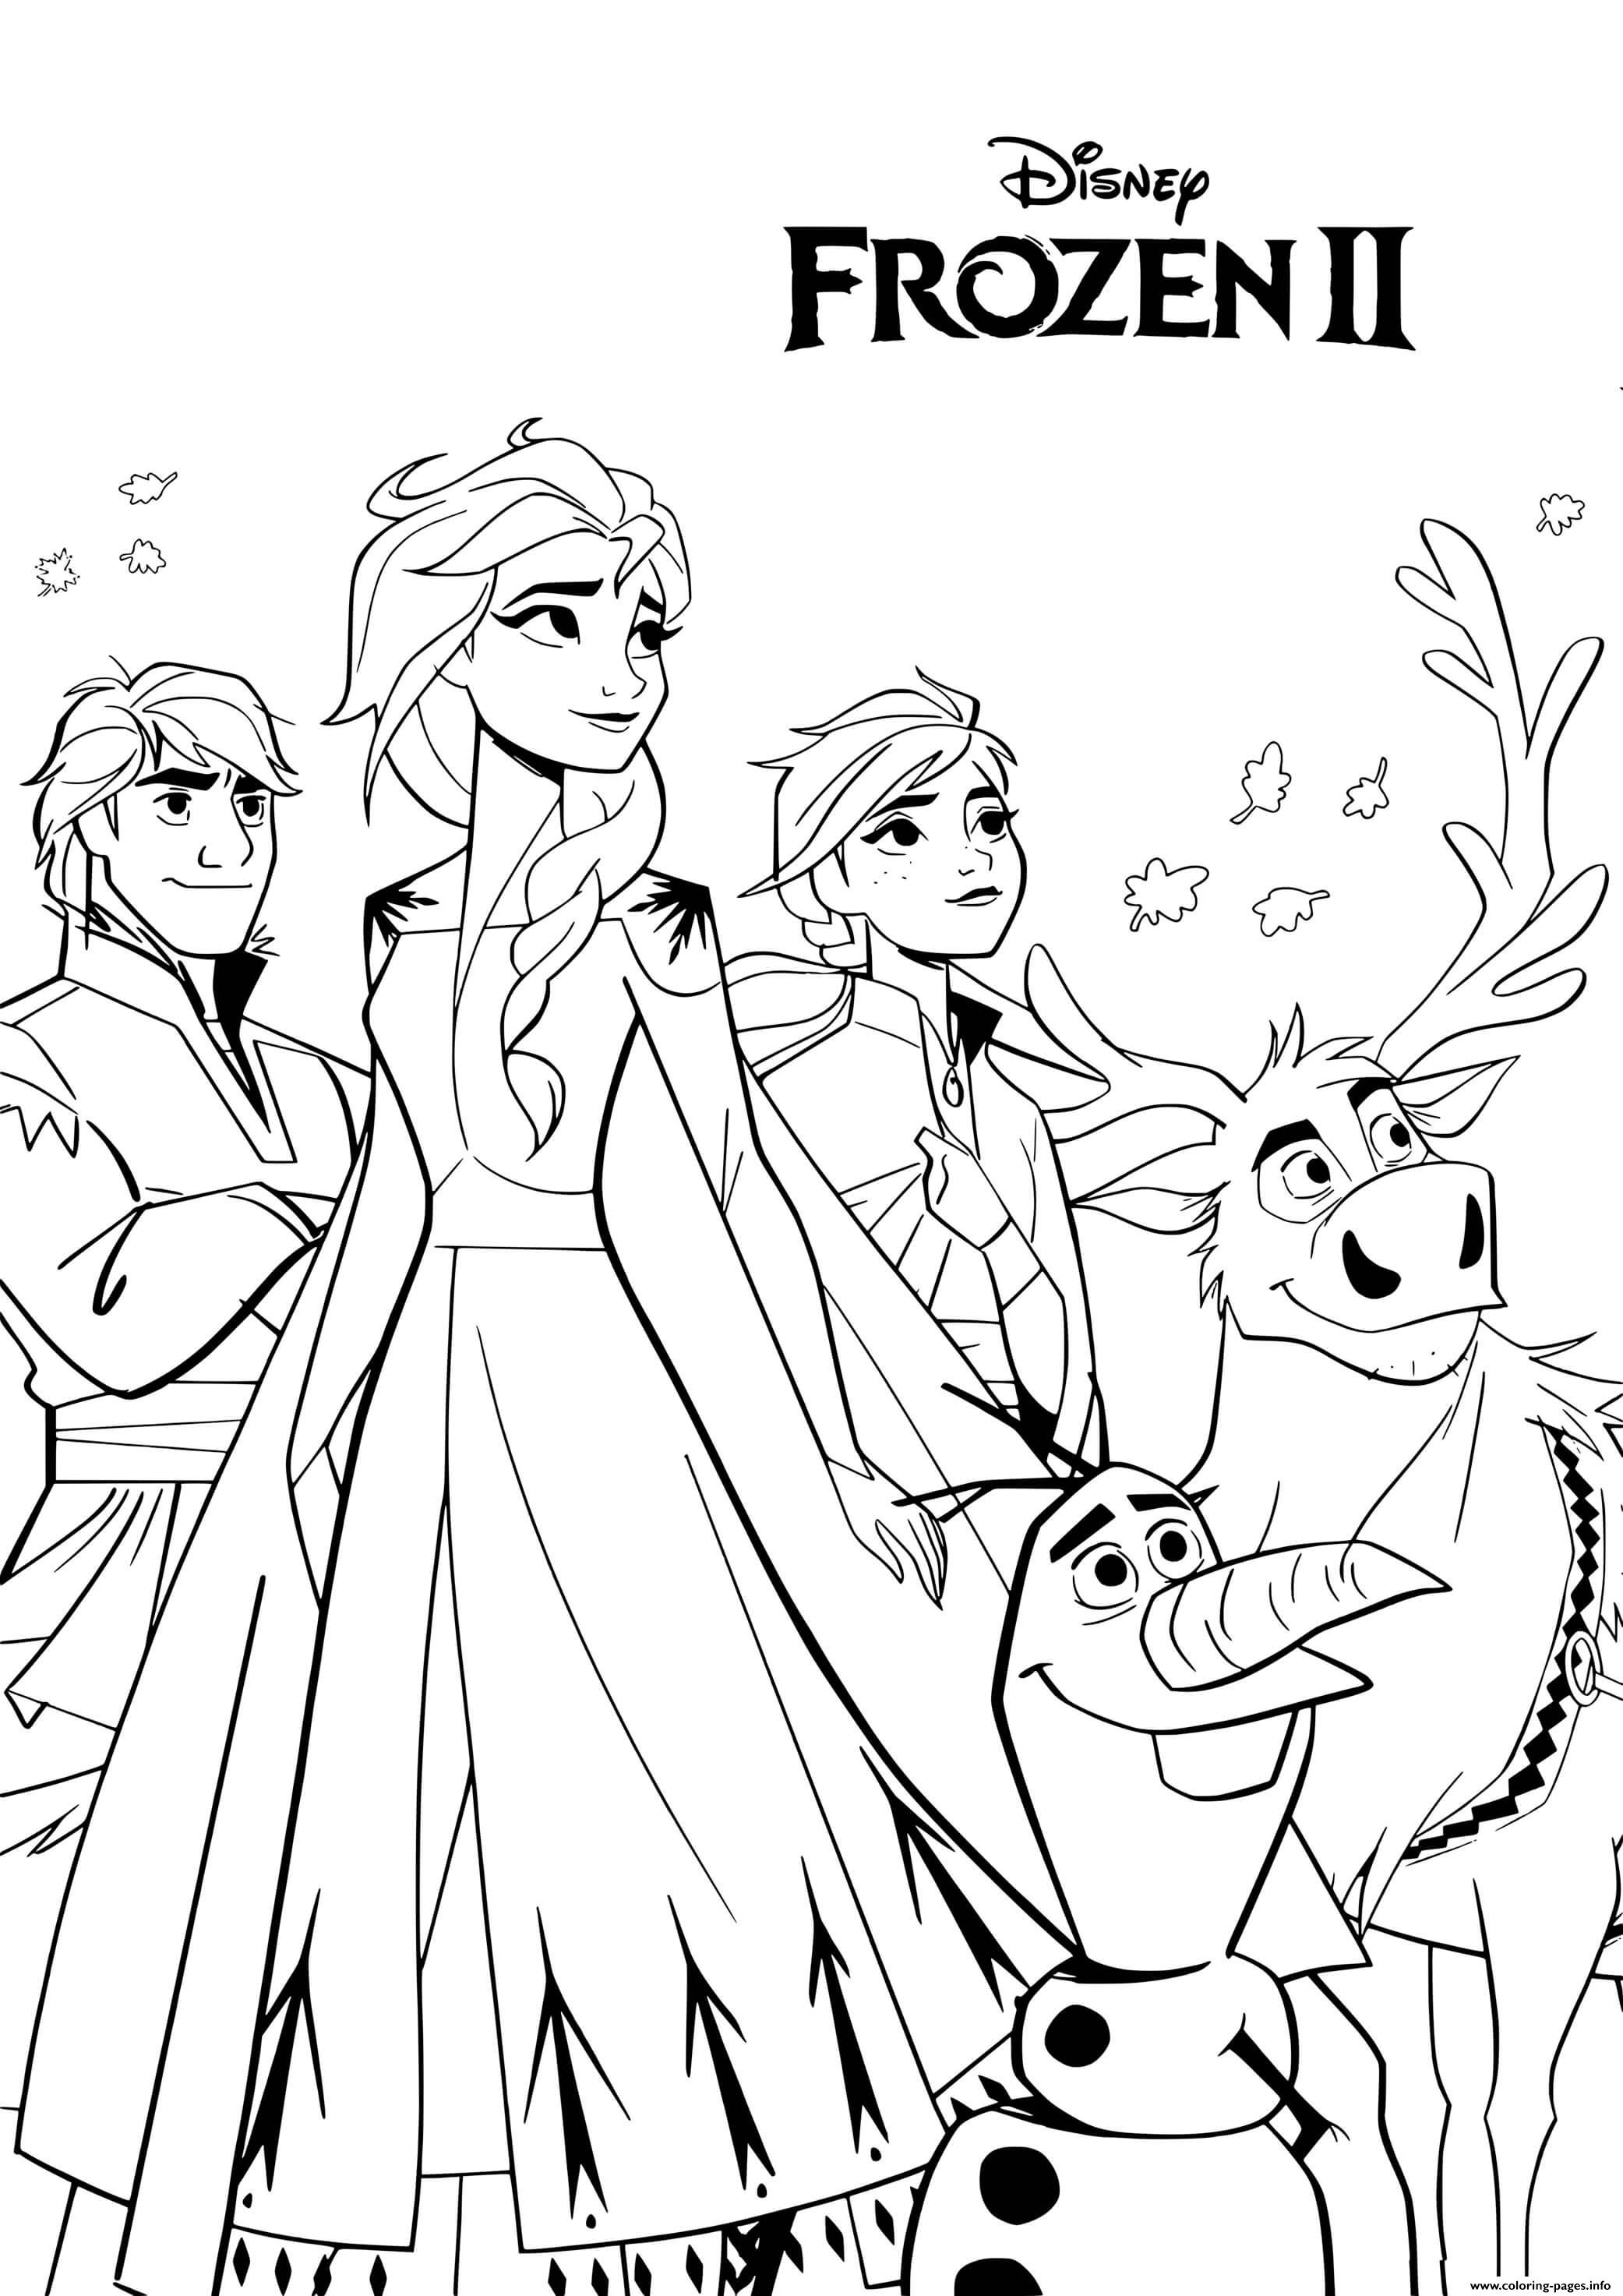 Animated Disney Movie Frozen 2 Coloring Pages Printable